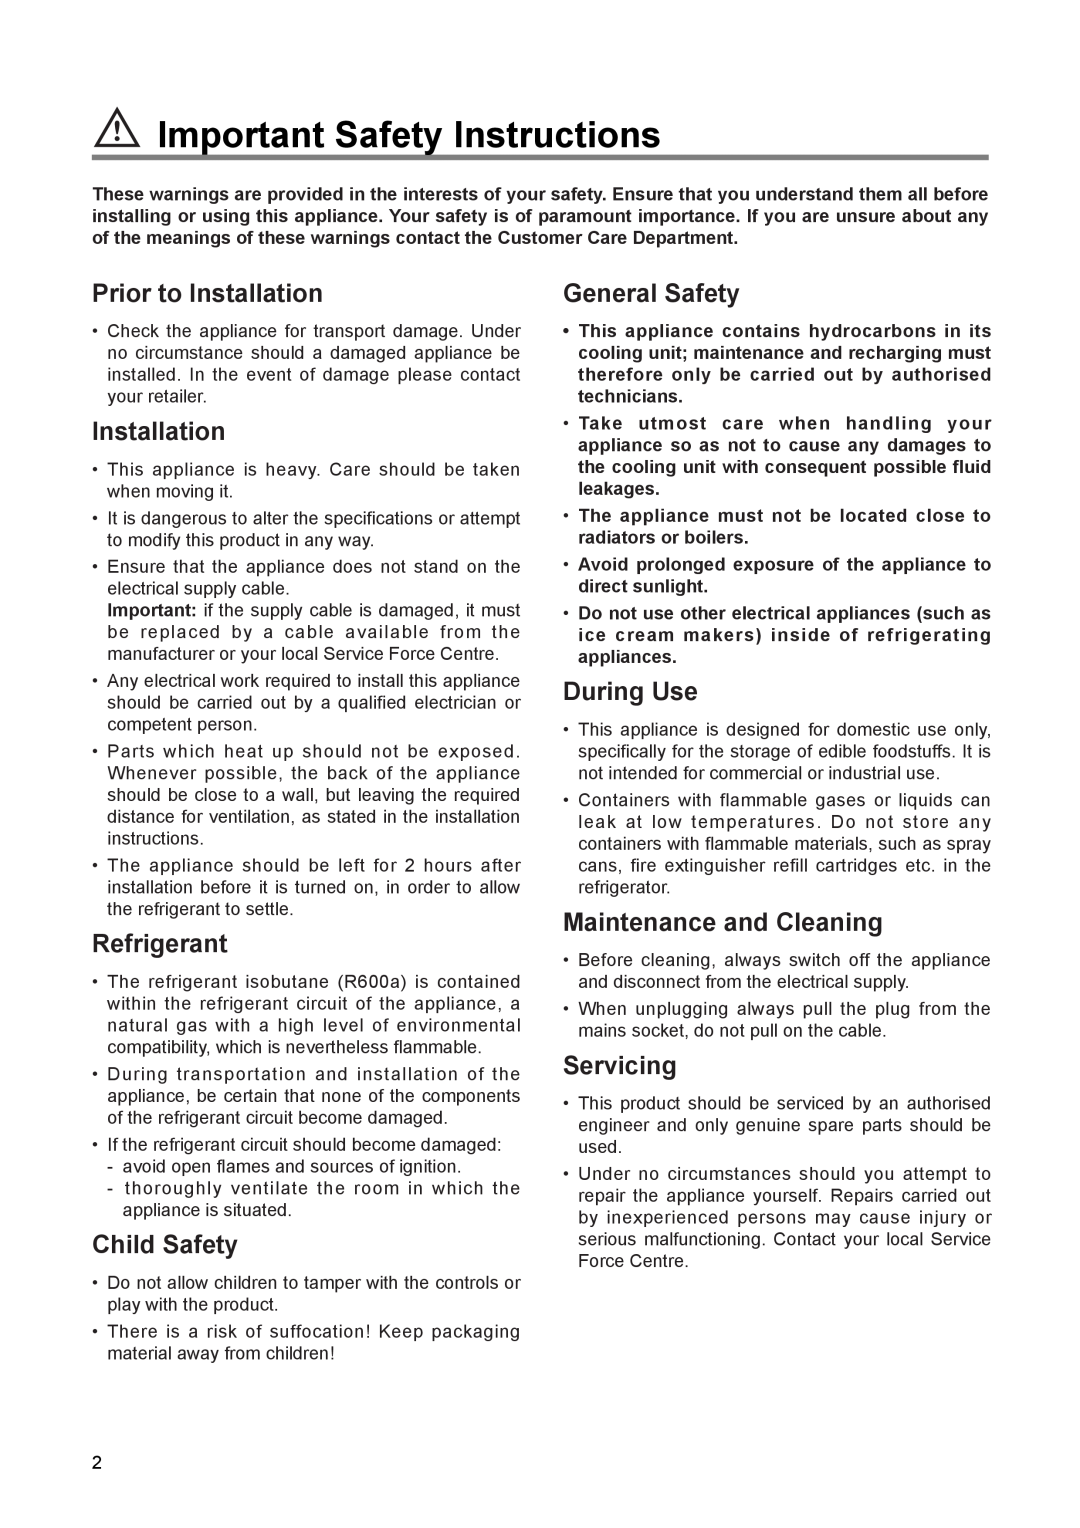 Electrolux ERN 1673 manual Important Safety Instructions, Prior to Installation, Refrigerant, Child Safety, General Safety 